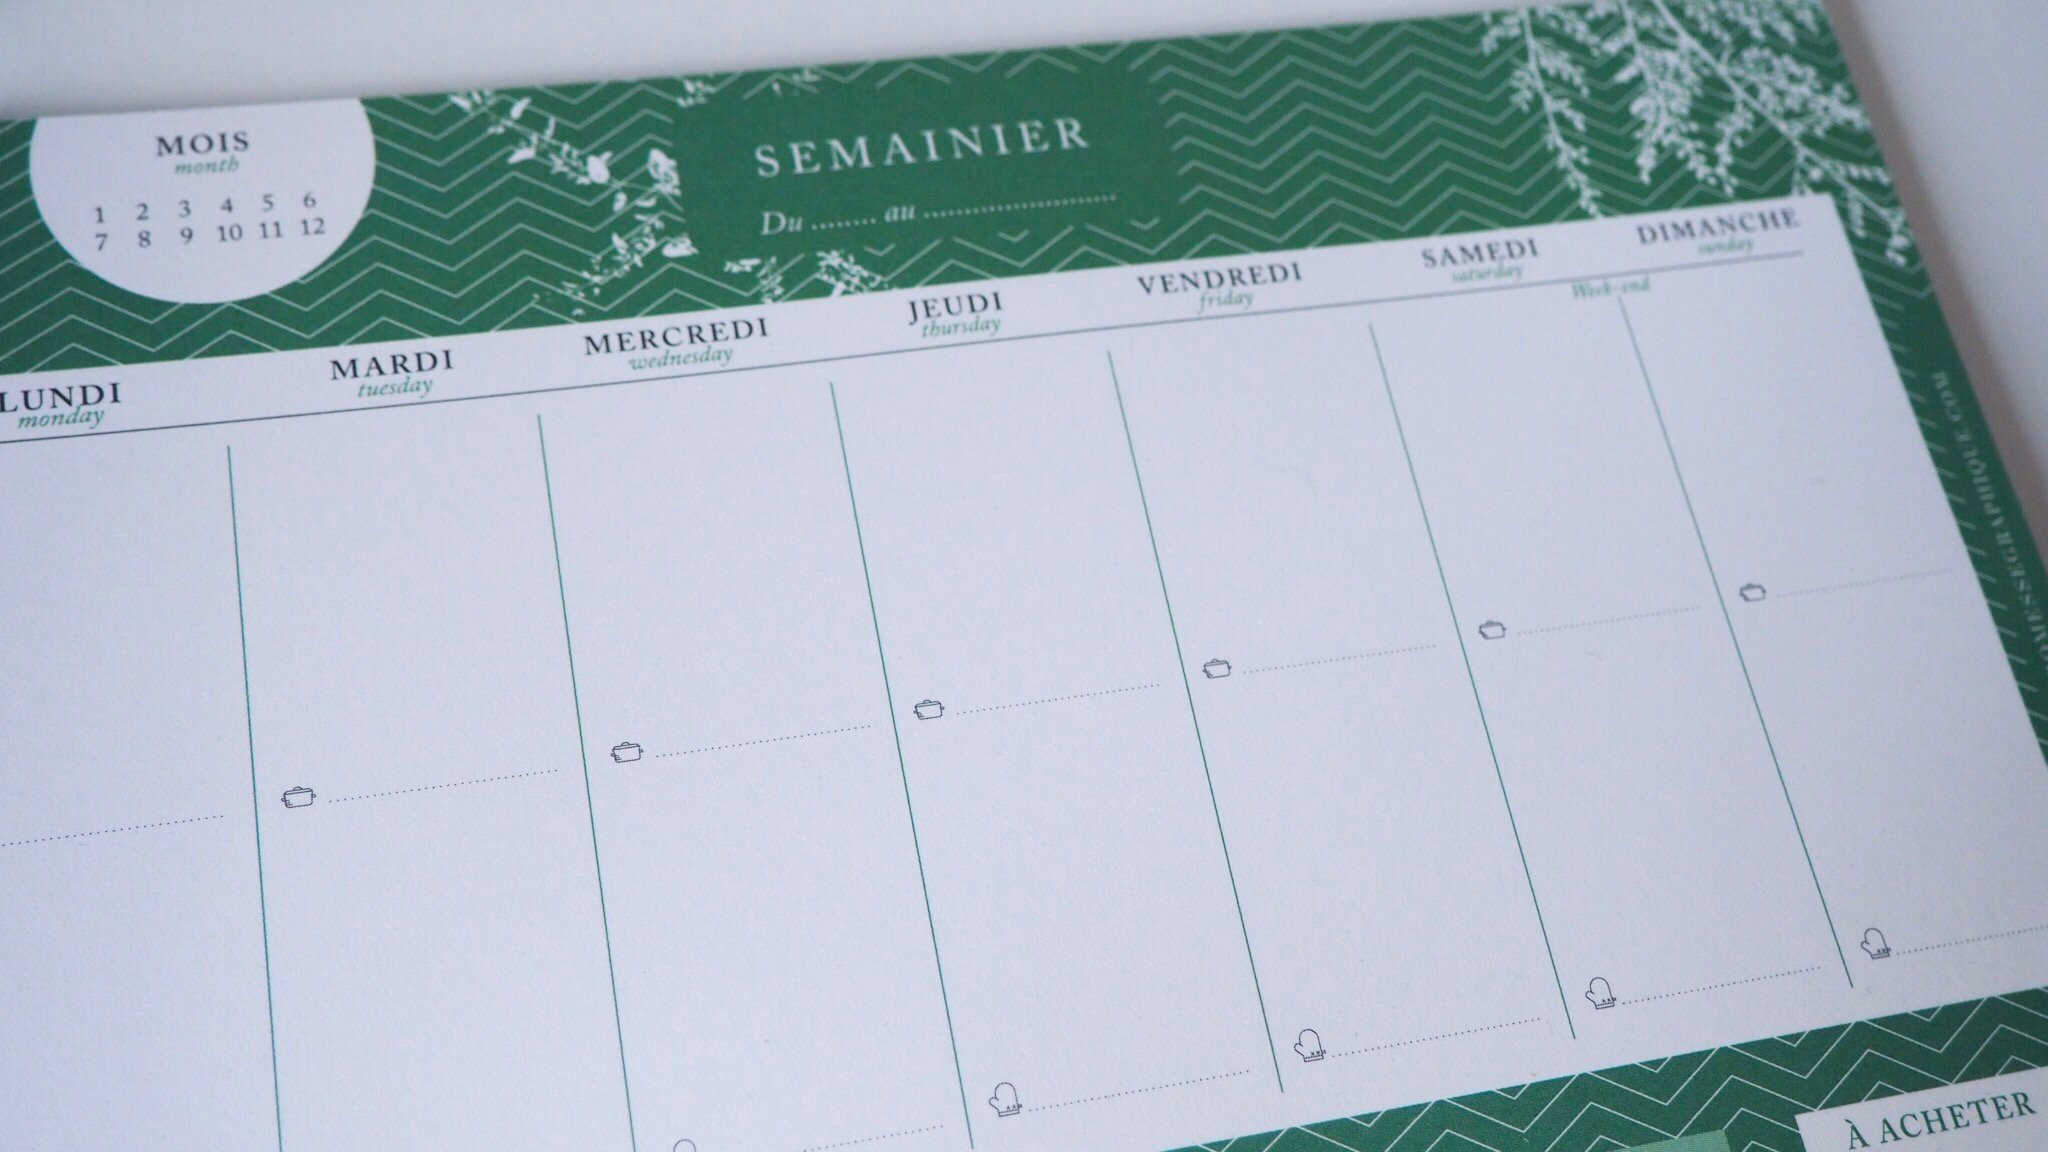 Semainier - Weekly planner - Promesse Graphique